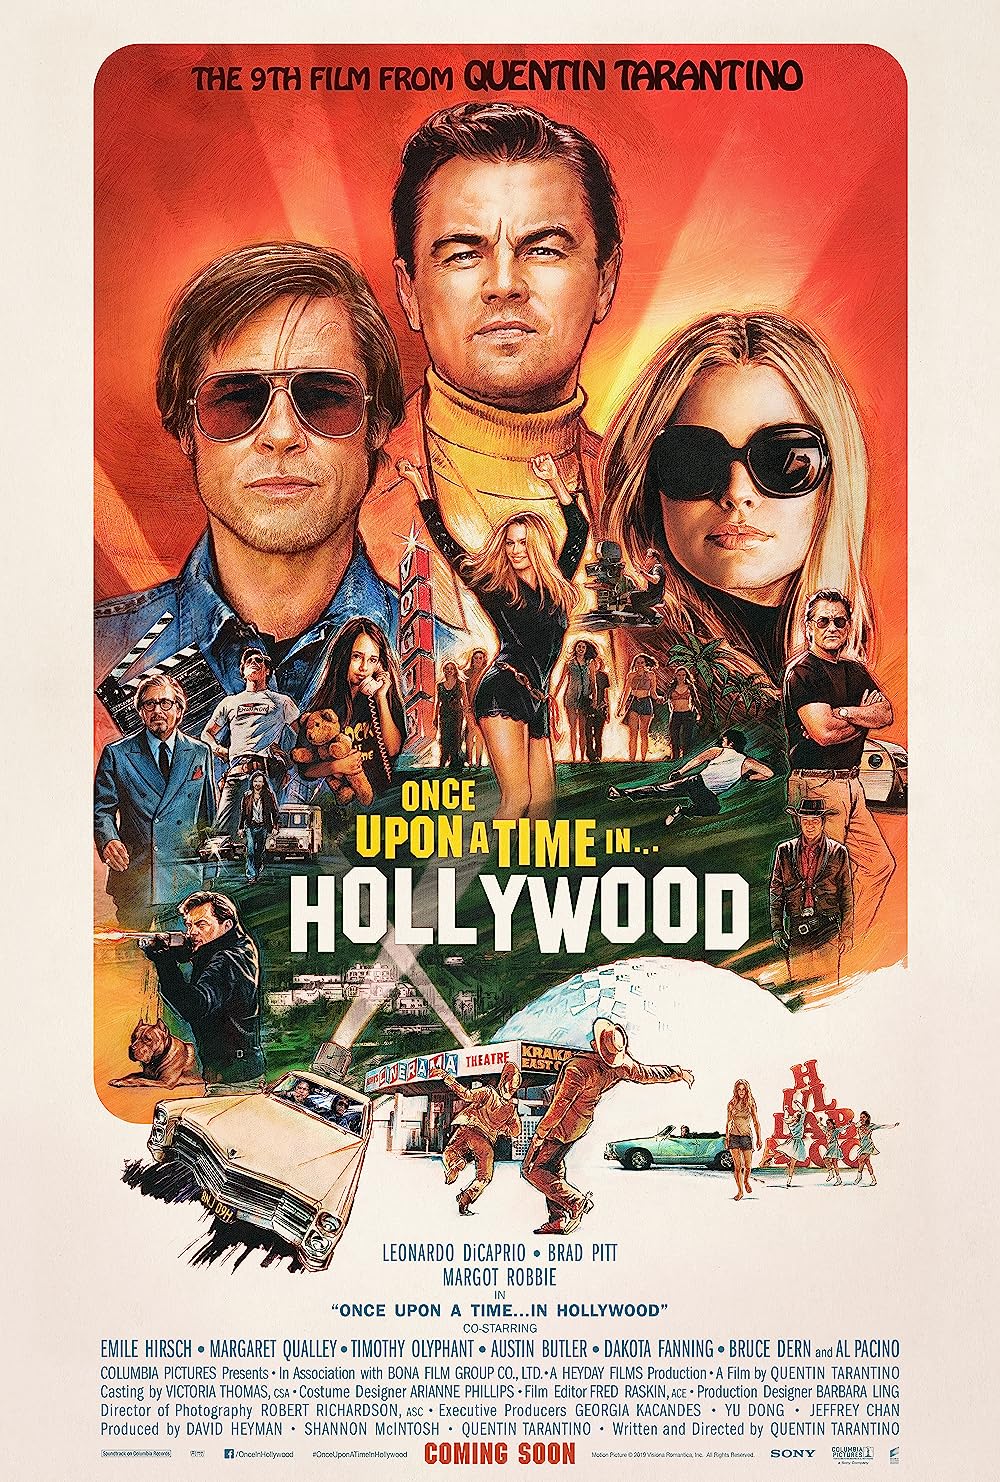 Is Once Upon a Time in Hollywood a Movie Made for Modern Audiences?